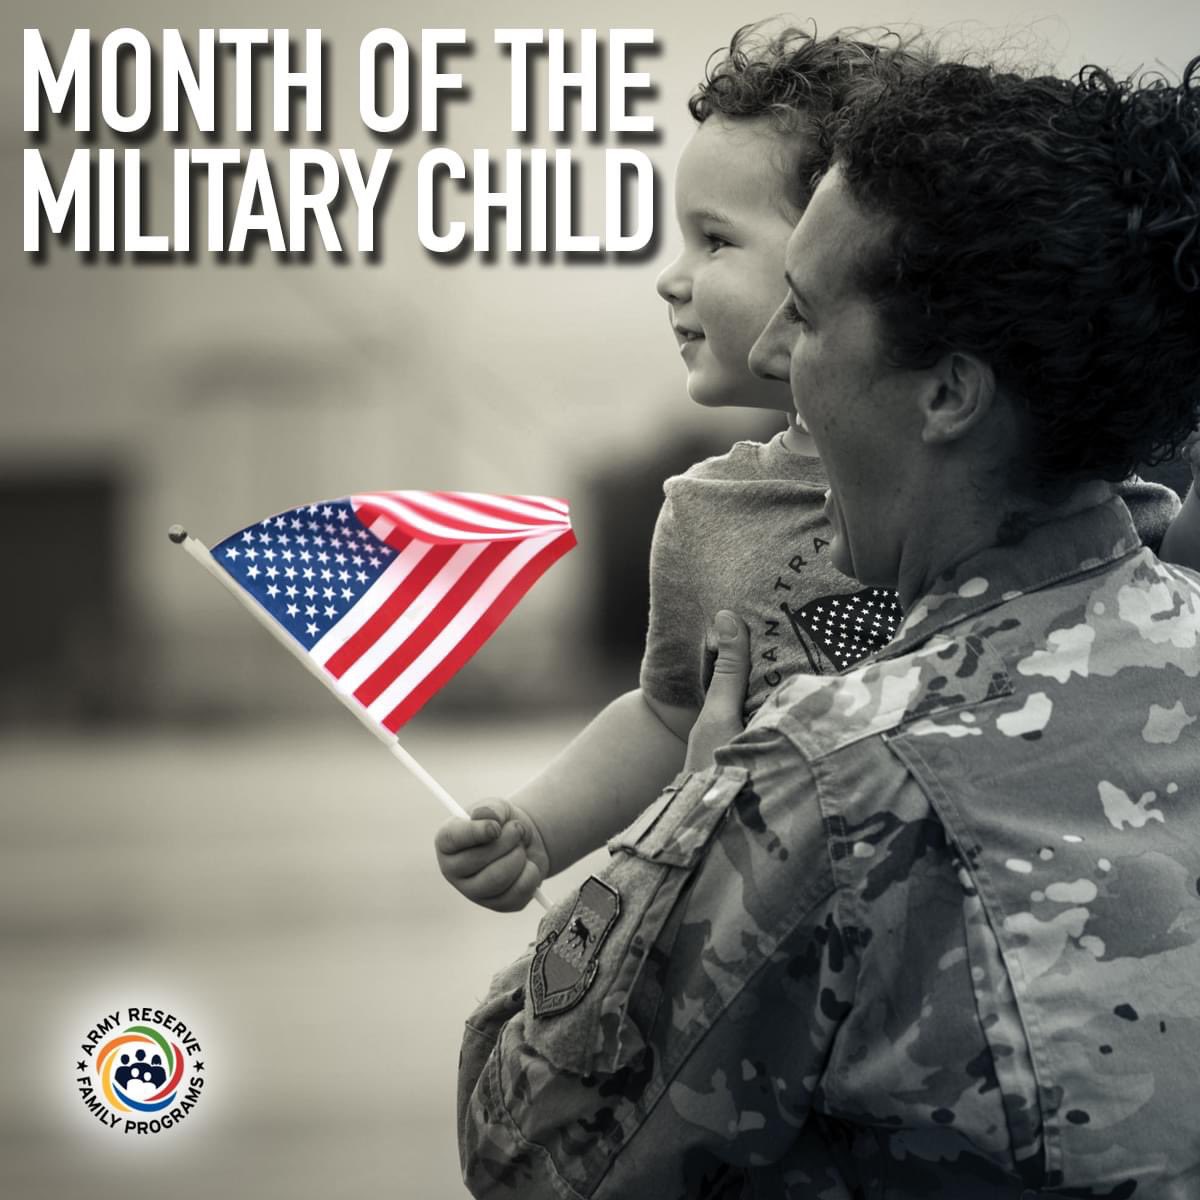 The unwavering strength, courage, and resilience displayed by our #militarychildren is truly inspiring to all. April is named Month of the Military Child, so let's honor, support, and uplift them during this month, and continue to do so when the month is over, each and every day.